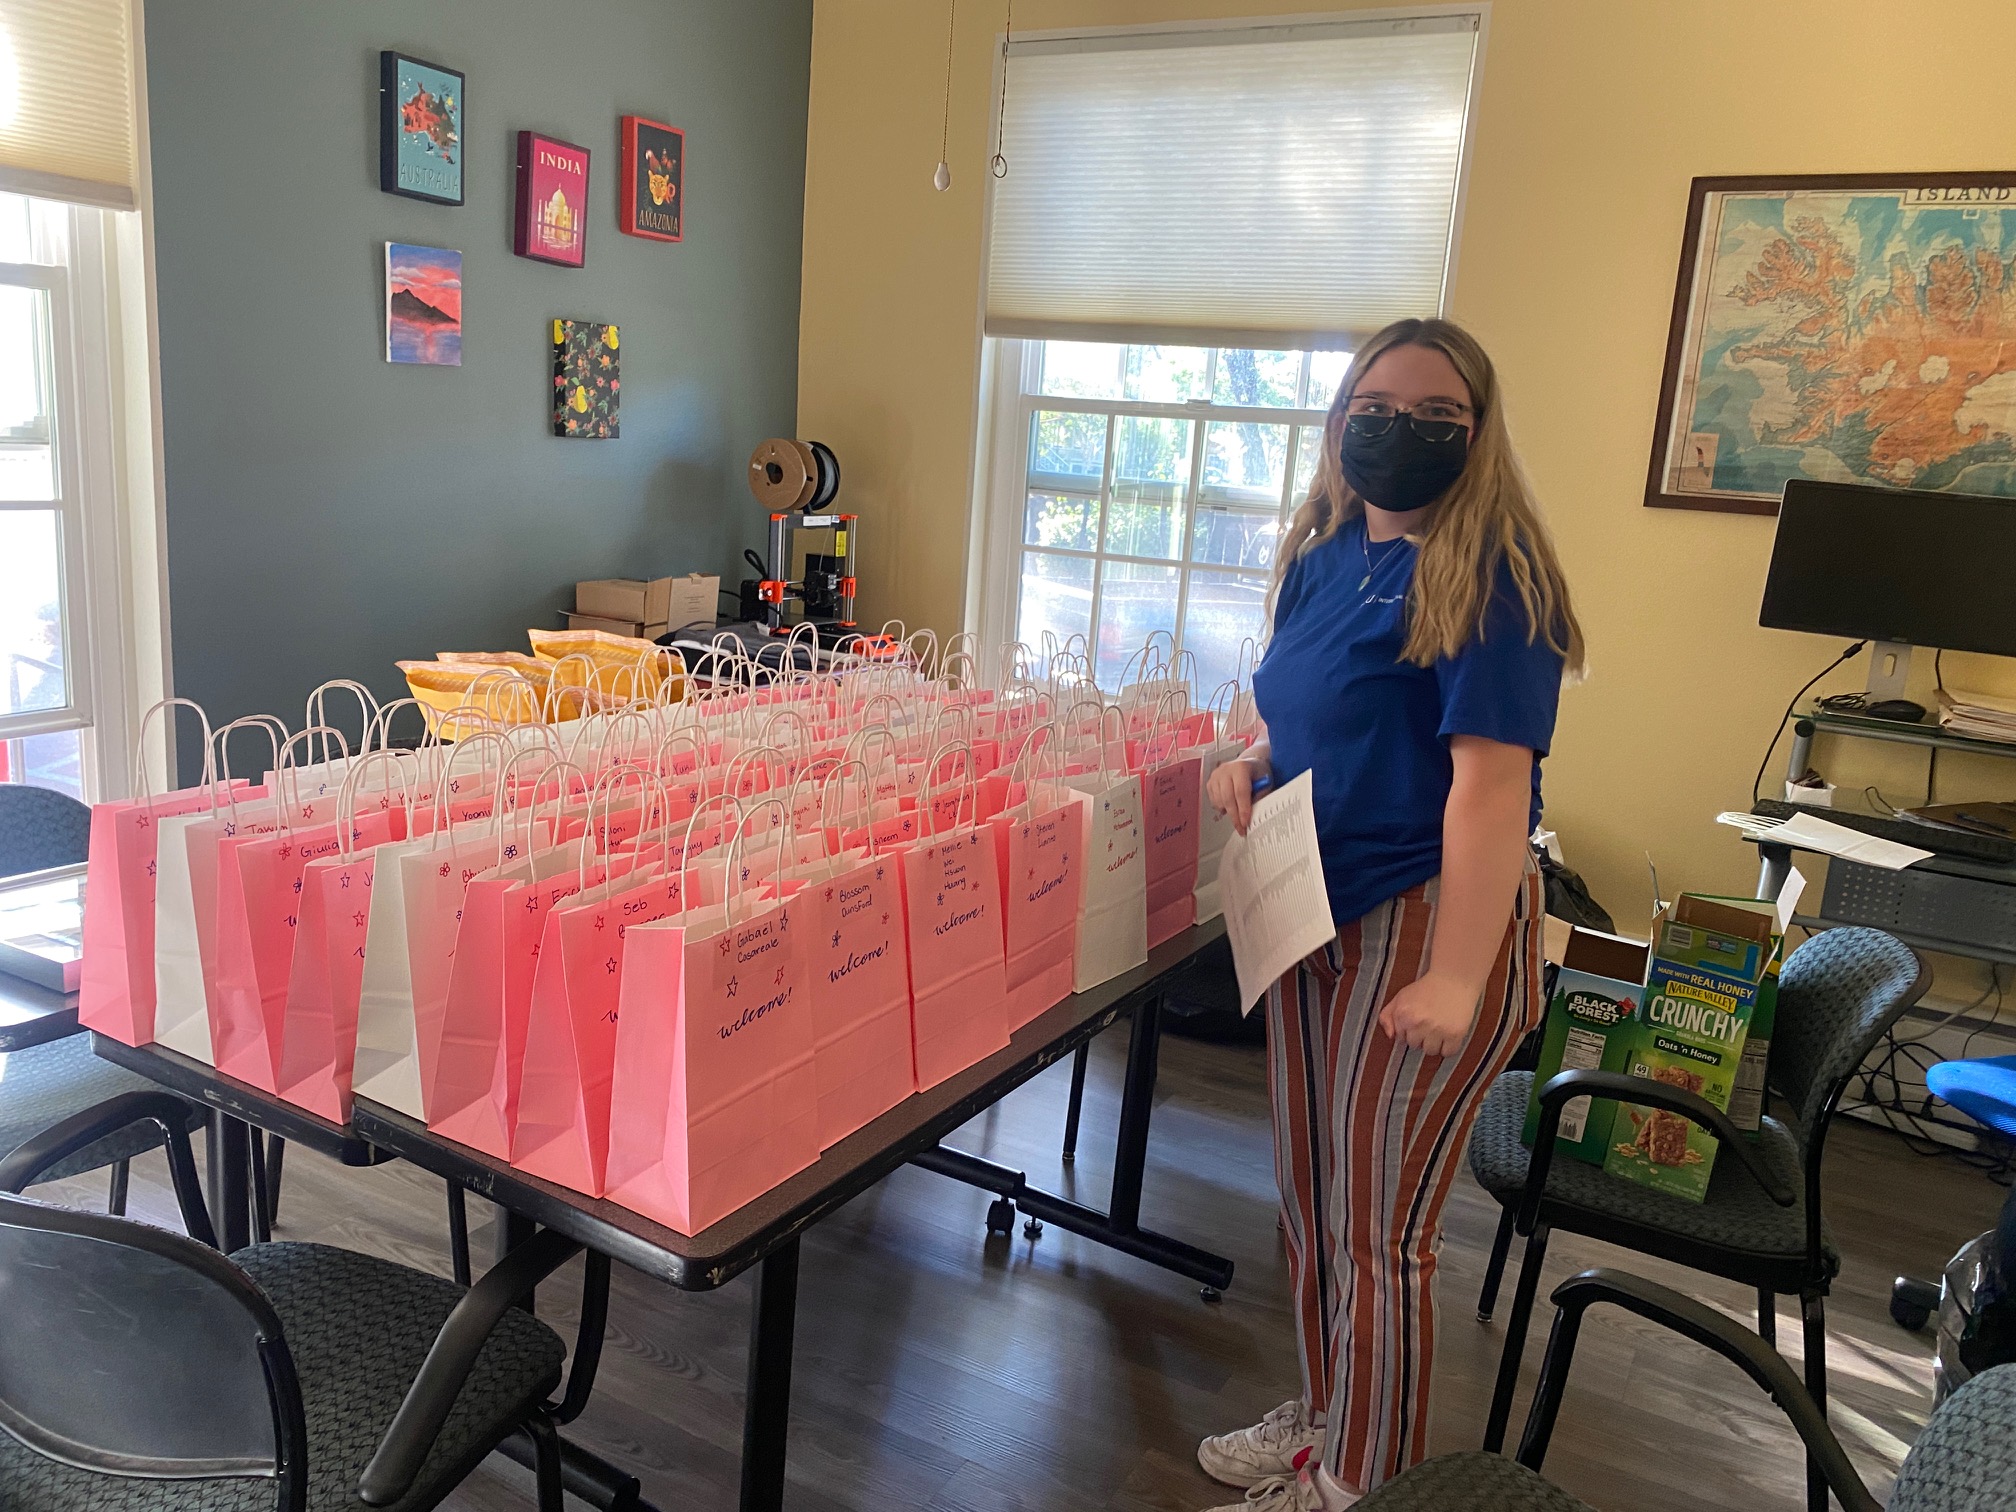 Maiah Cast making Welcome Bags fall 2022